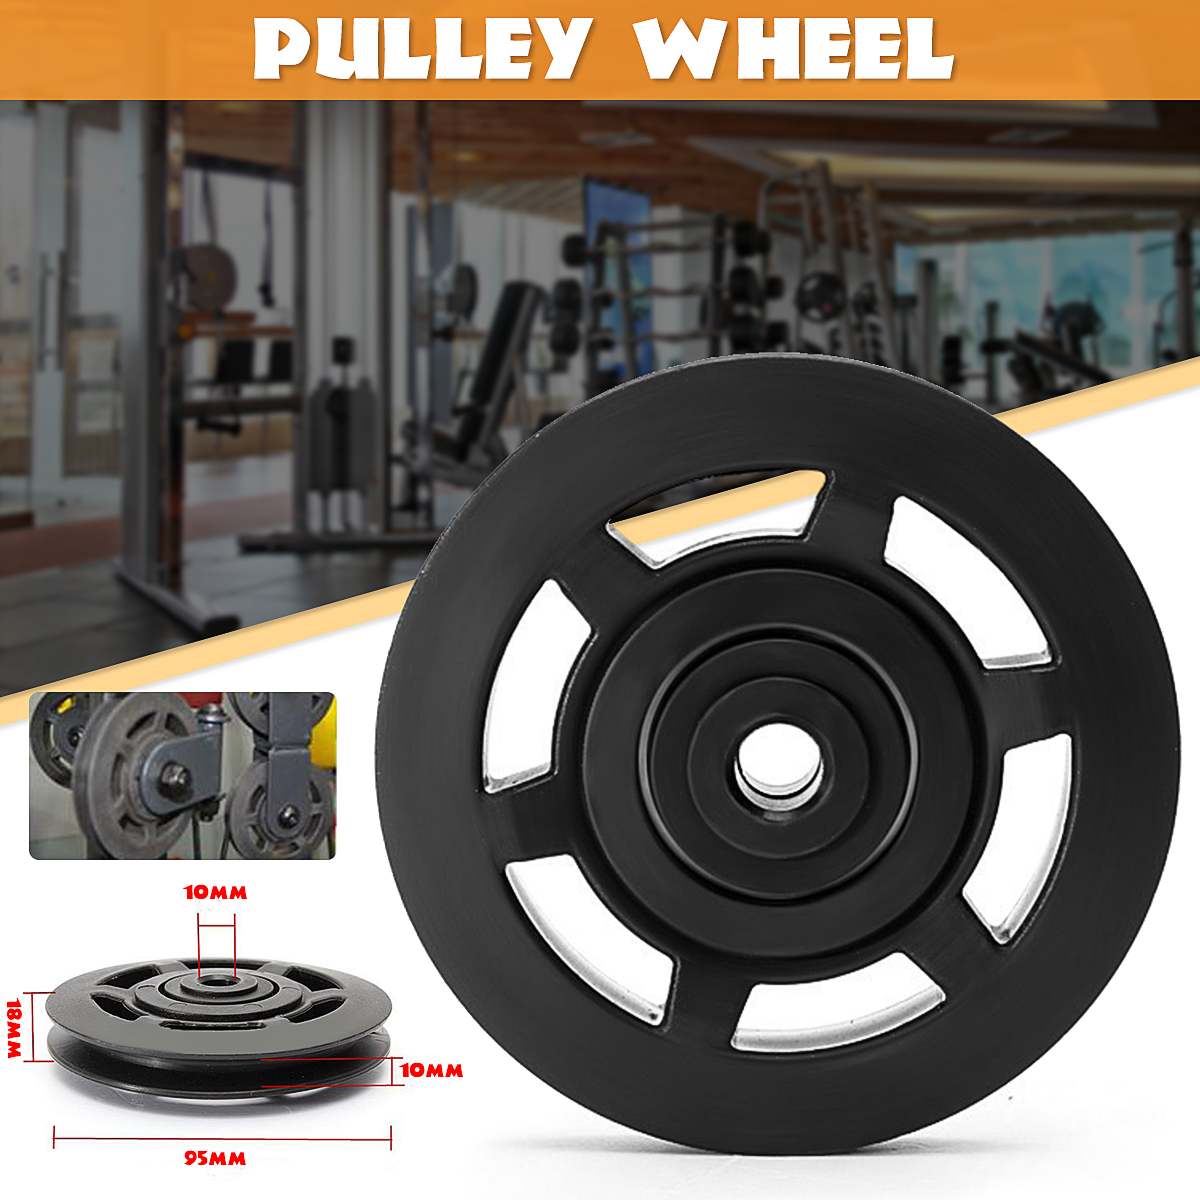 Universal 95mm Diameter Wearproof Nylon Bearing Pulley Wheel Cable Gym Fitness Equipment Part